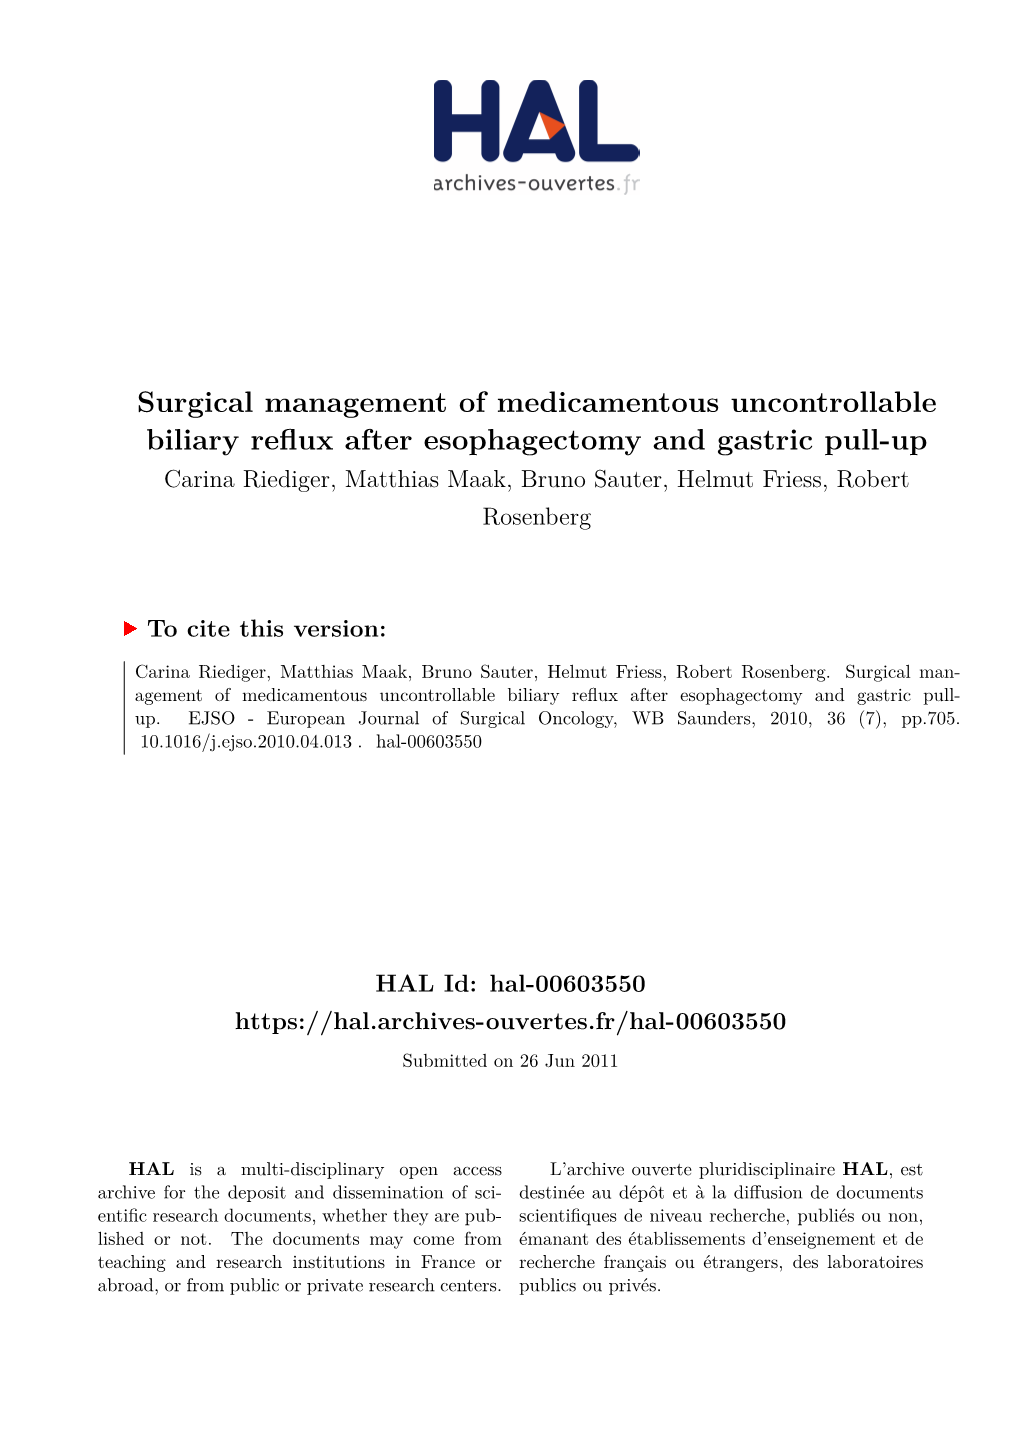 Surgical Management of Medicamentous Uncontrollable Biliary Reflux After Esophagectomy and Gastric Pull-Up